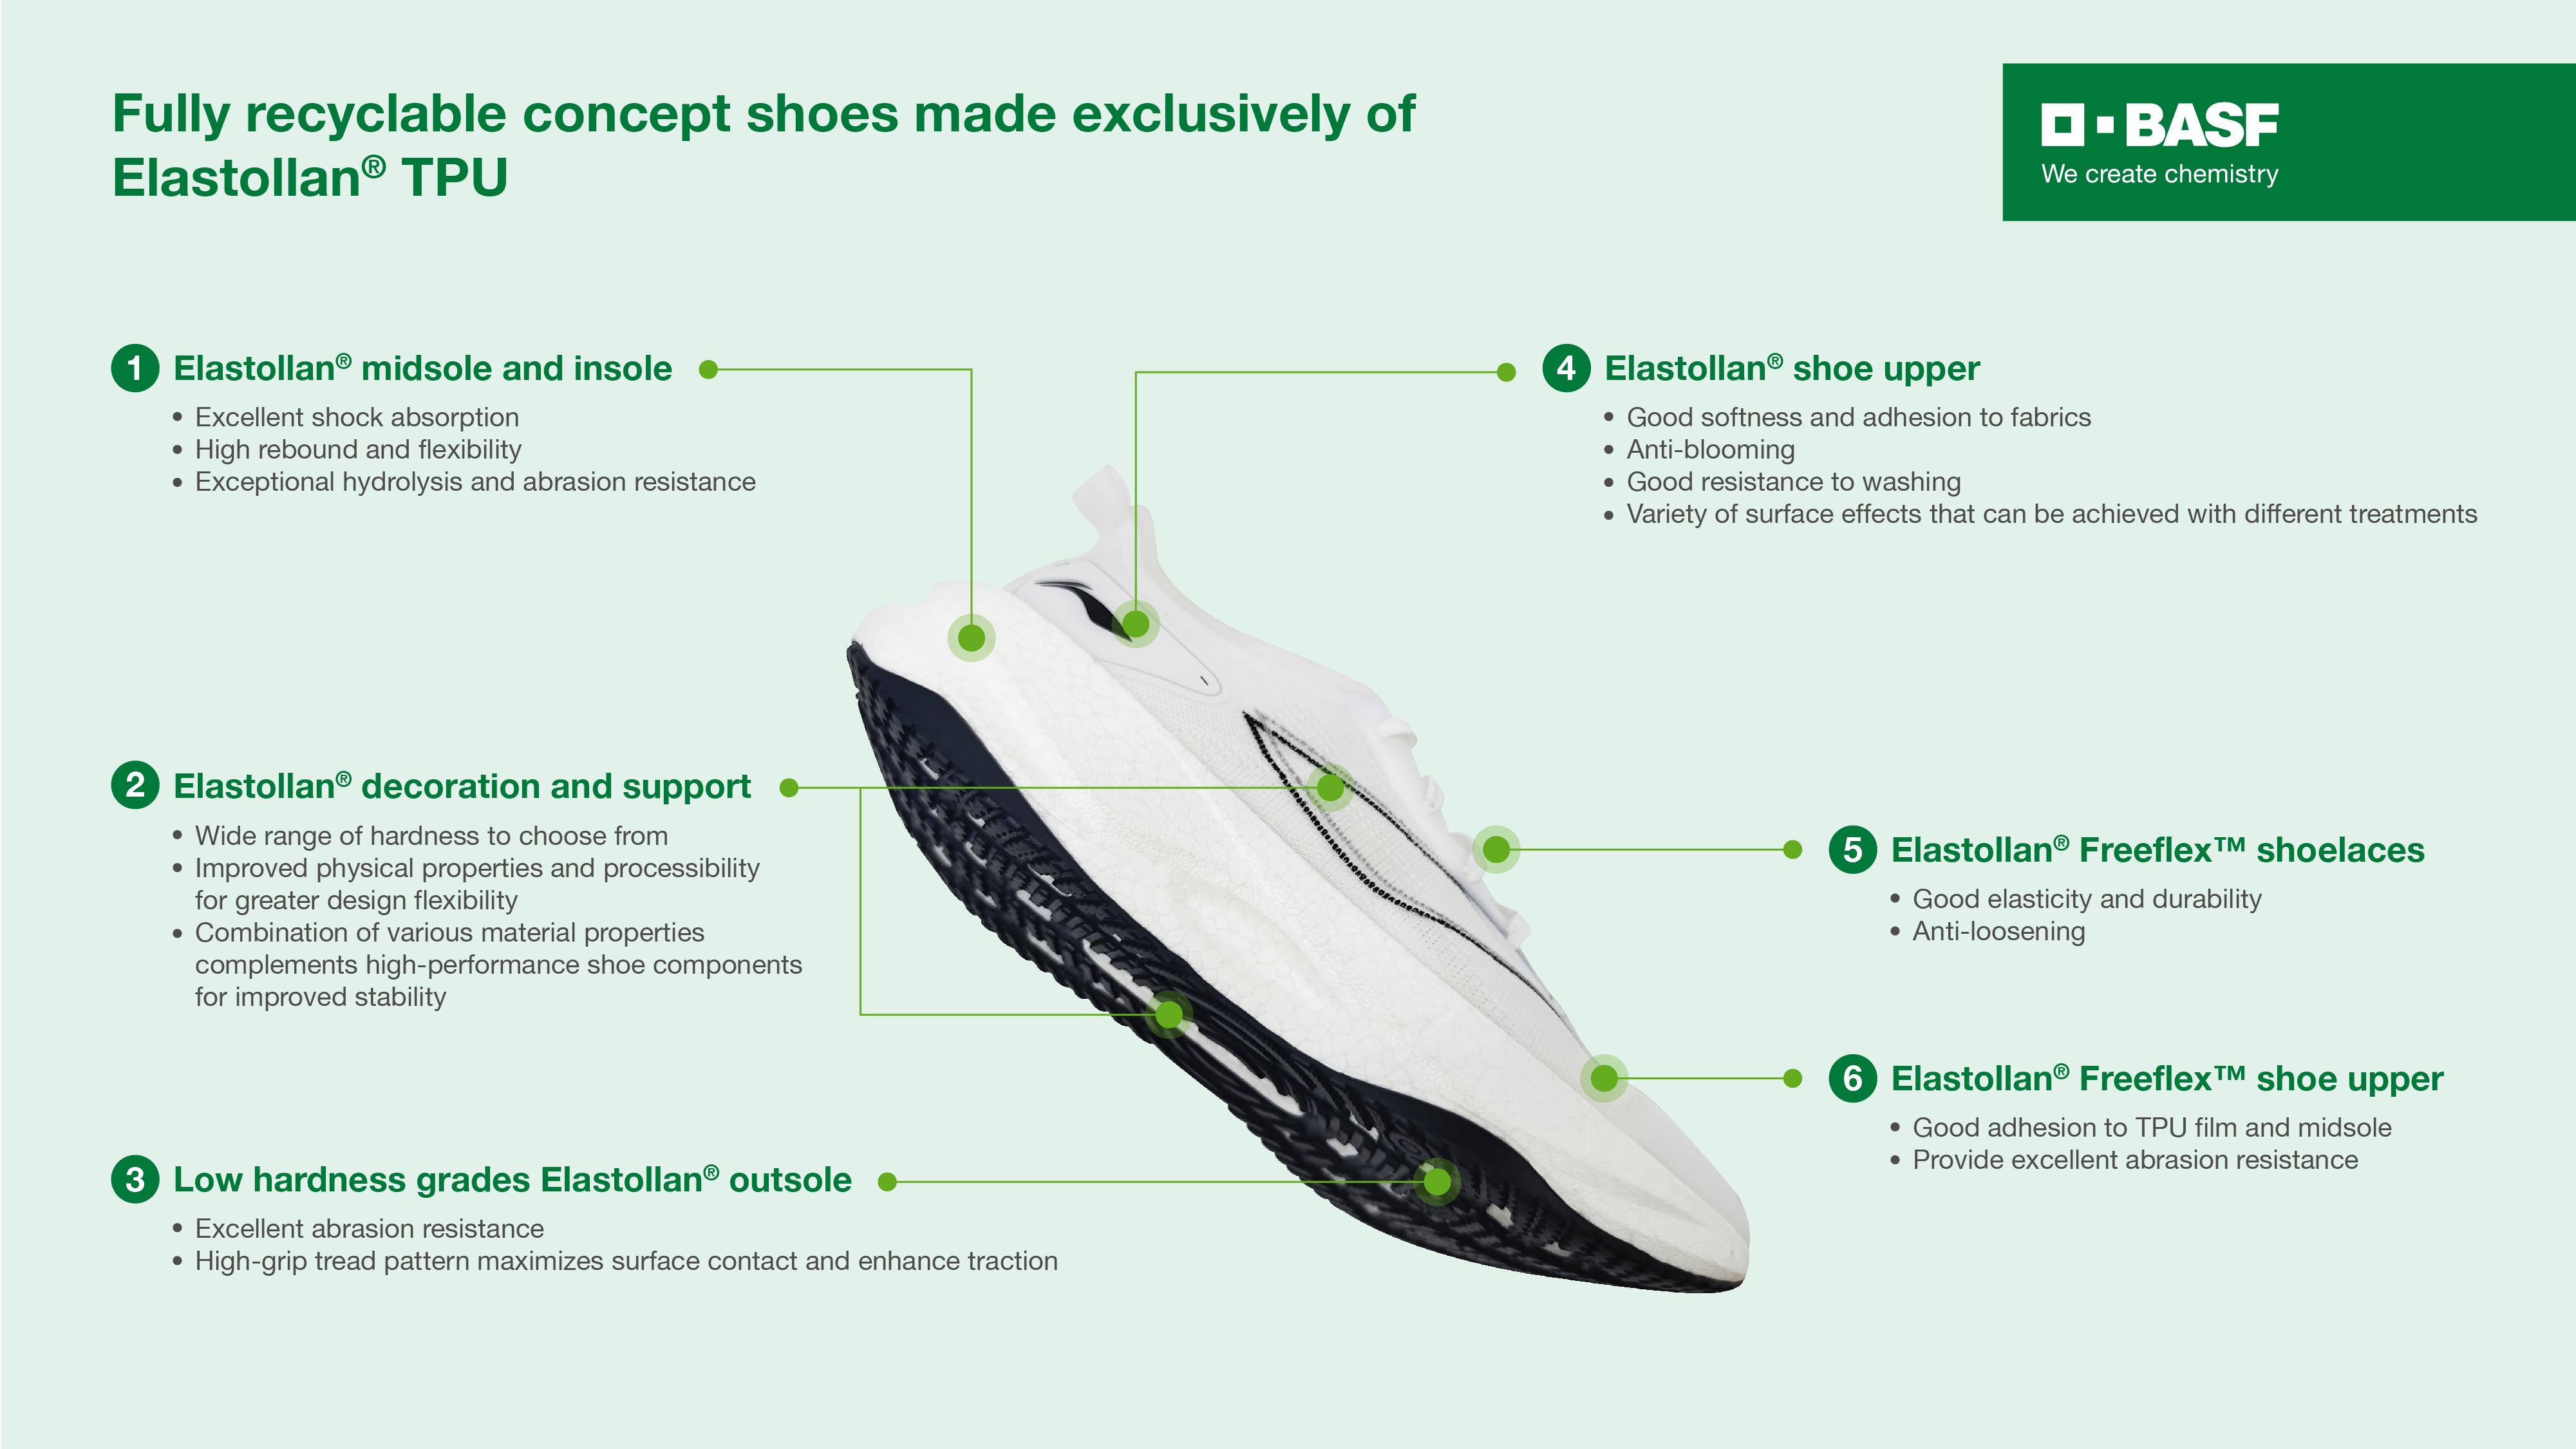 BASF fully recyclable concept shoes made exclusively of Elastollan庐 TPU.jpg